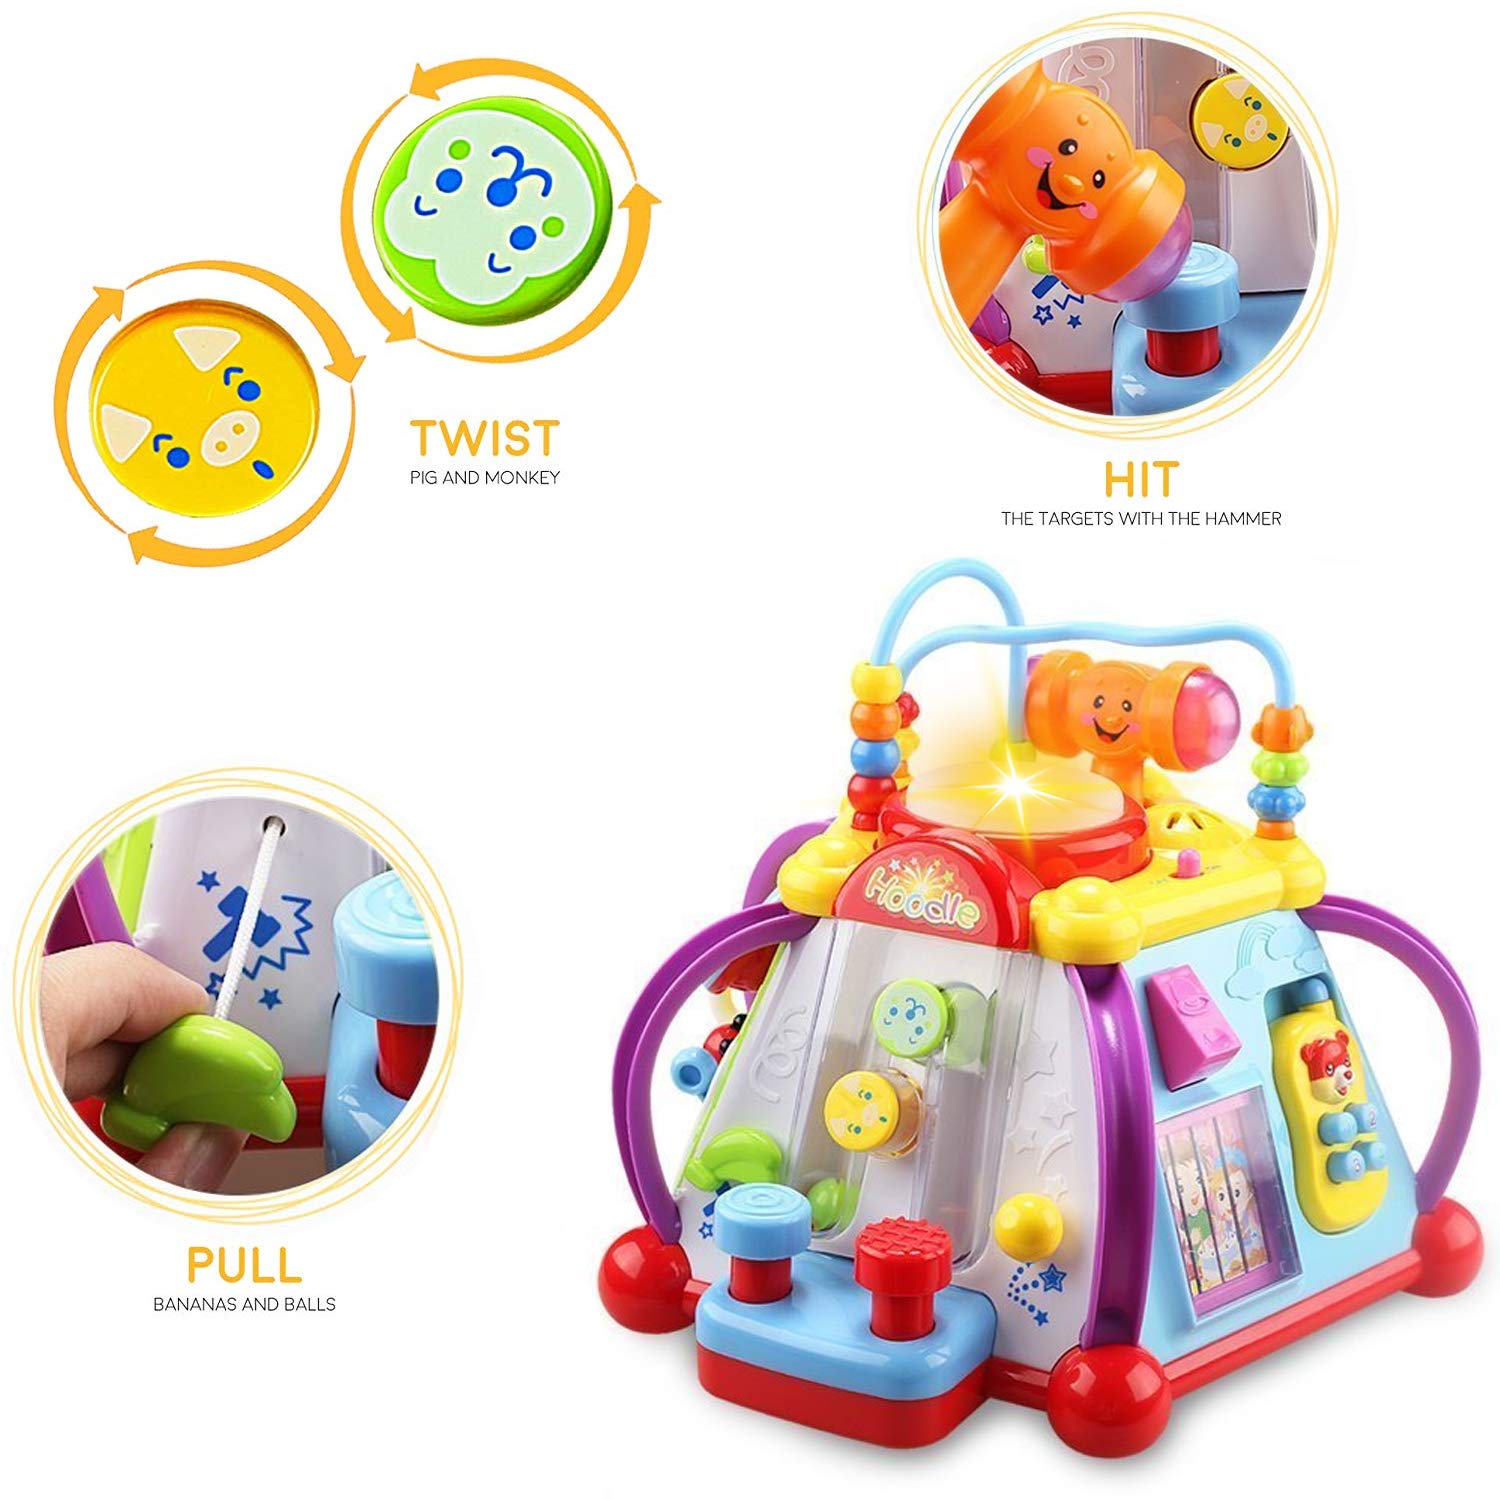 Woby Musical Activity Cube Toy Development Educational Game Play Learning Center Toy for 1 Year Old Baby Toddler Boy and Girl